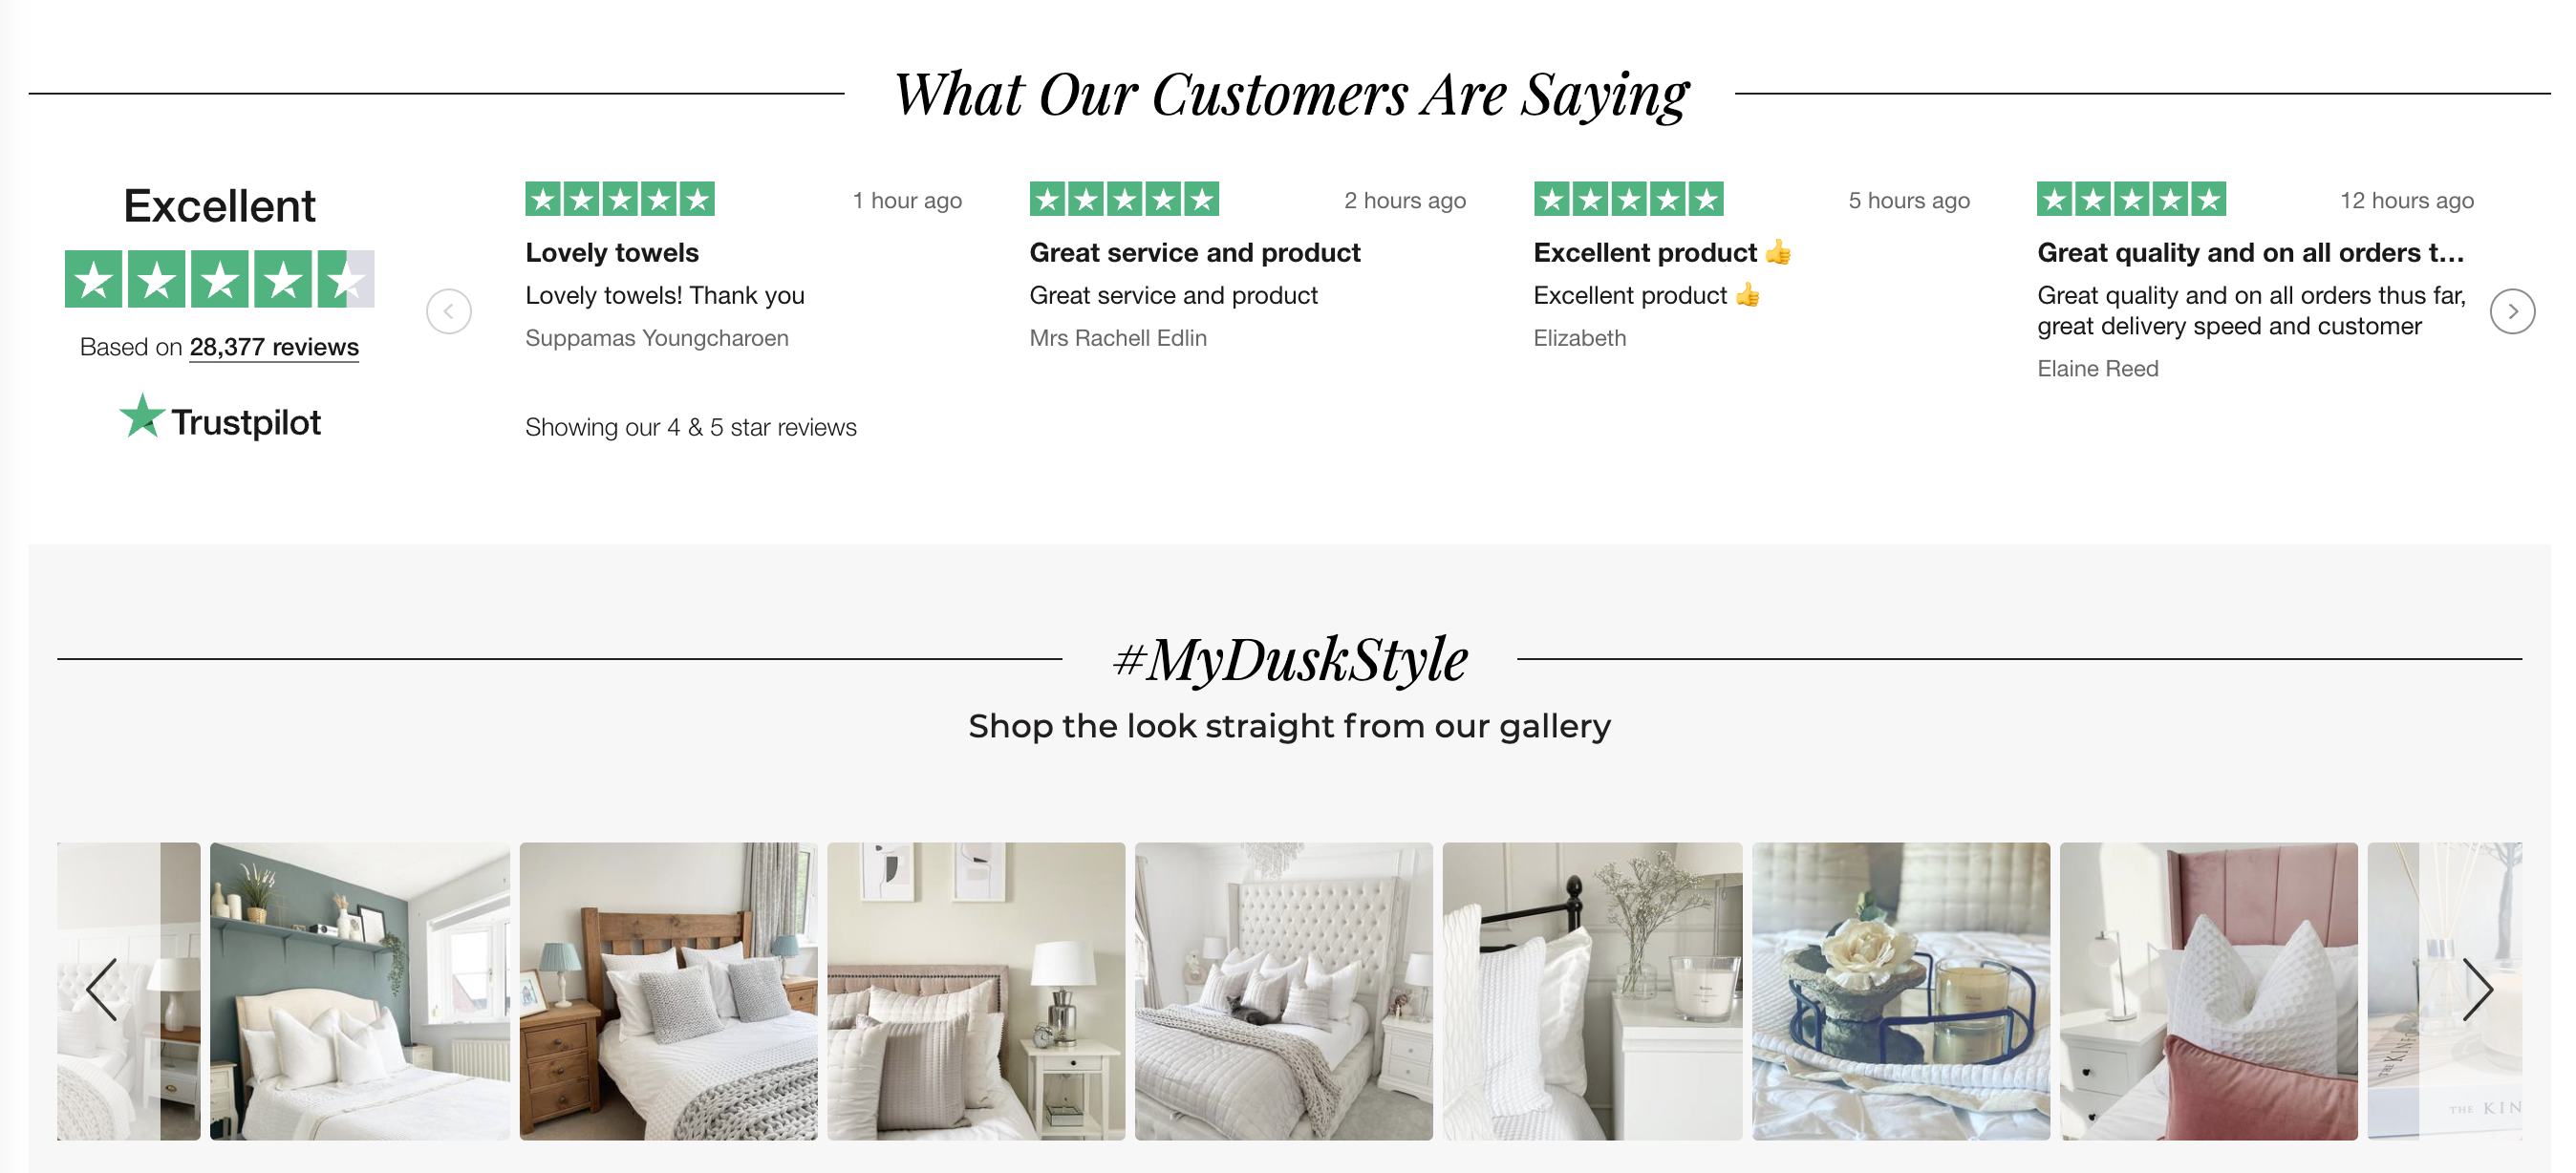 Dusk uses Trustpilot reviews directly on-site